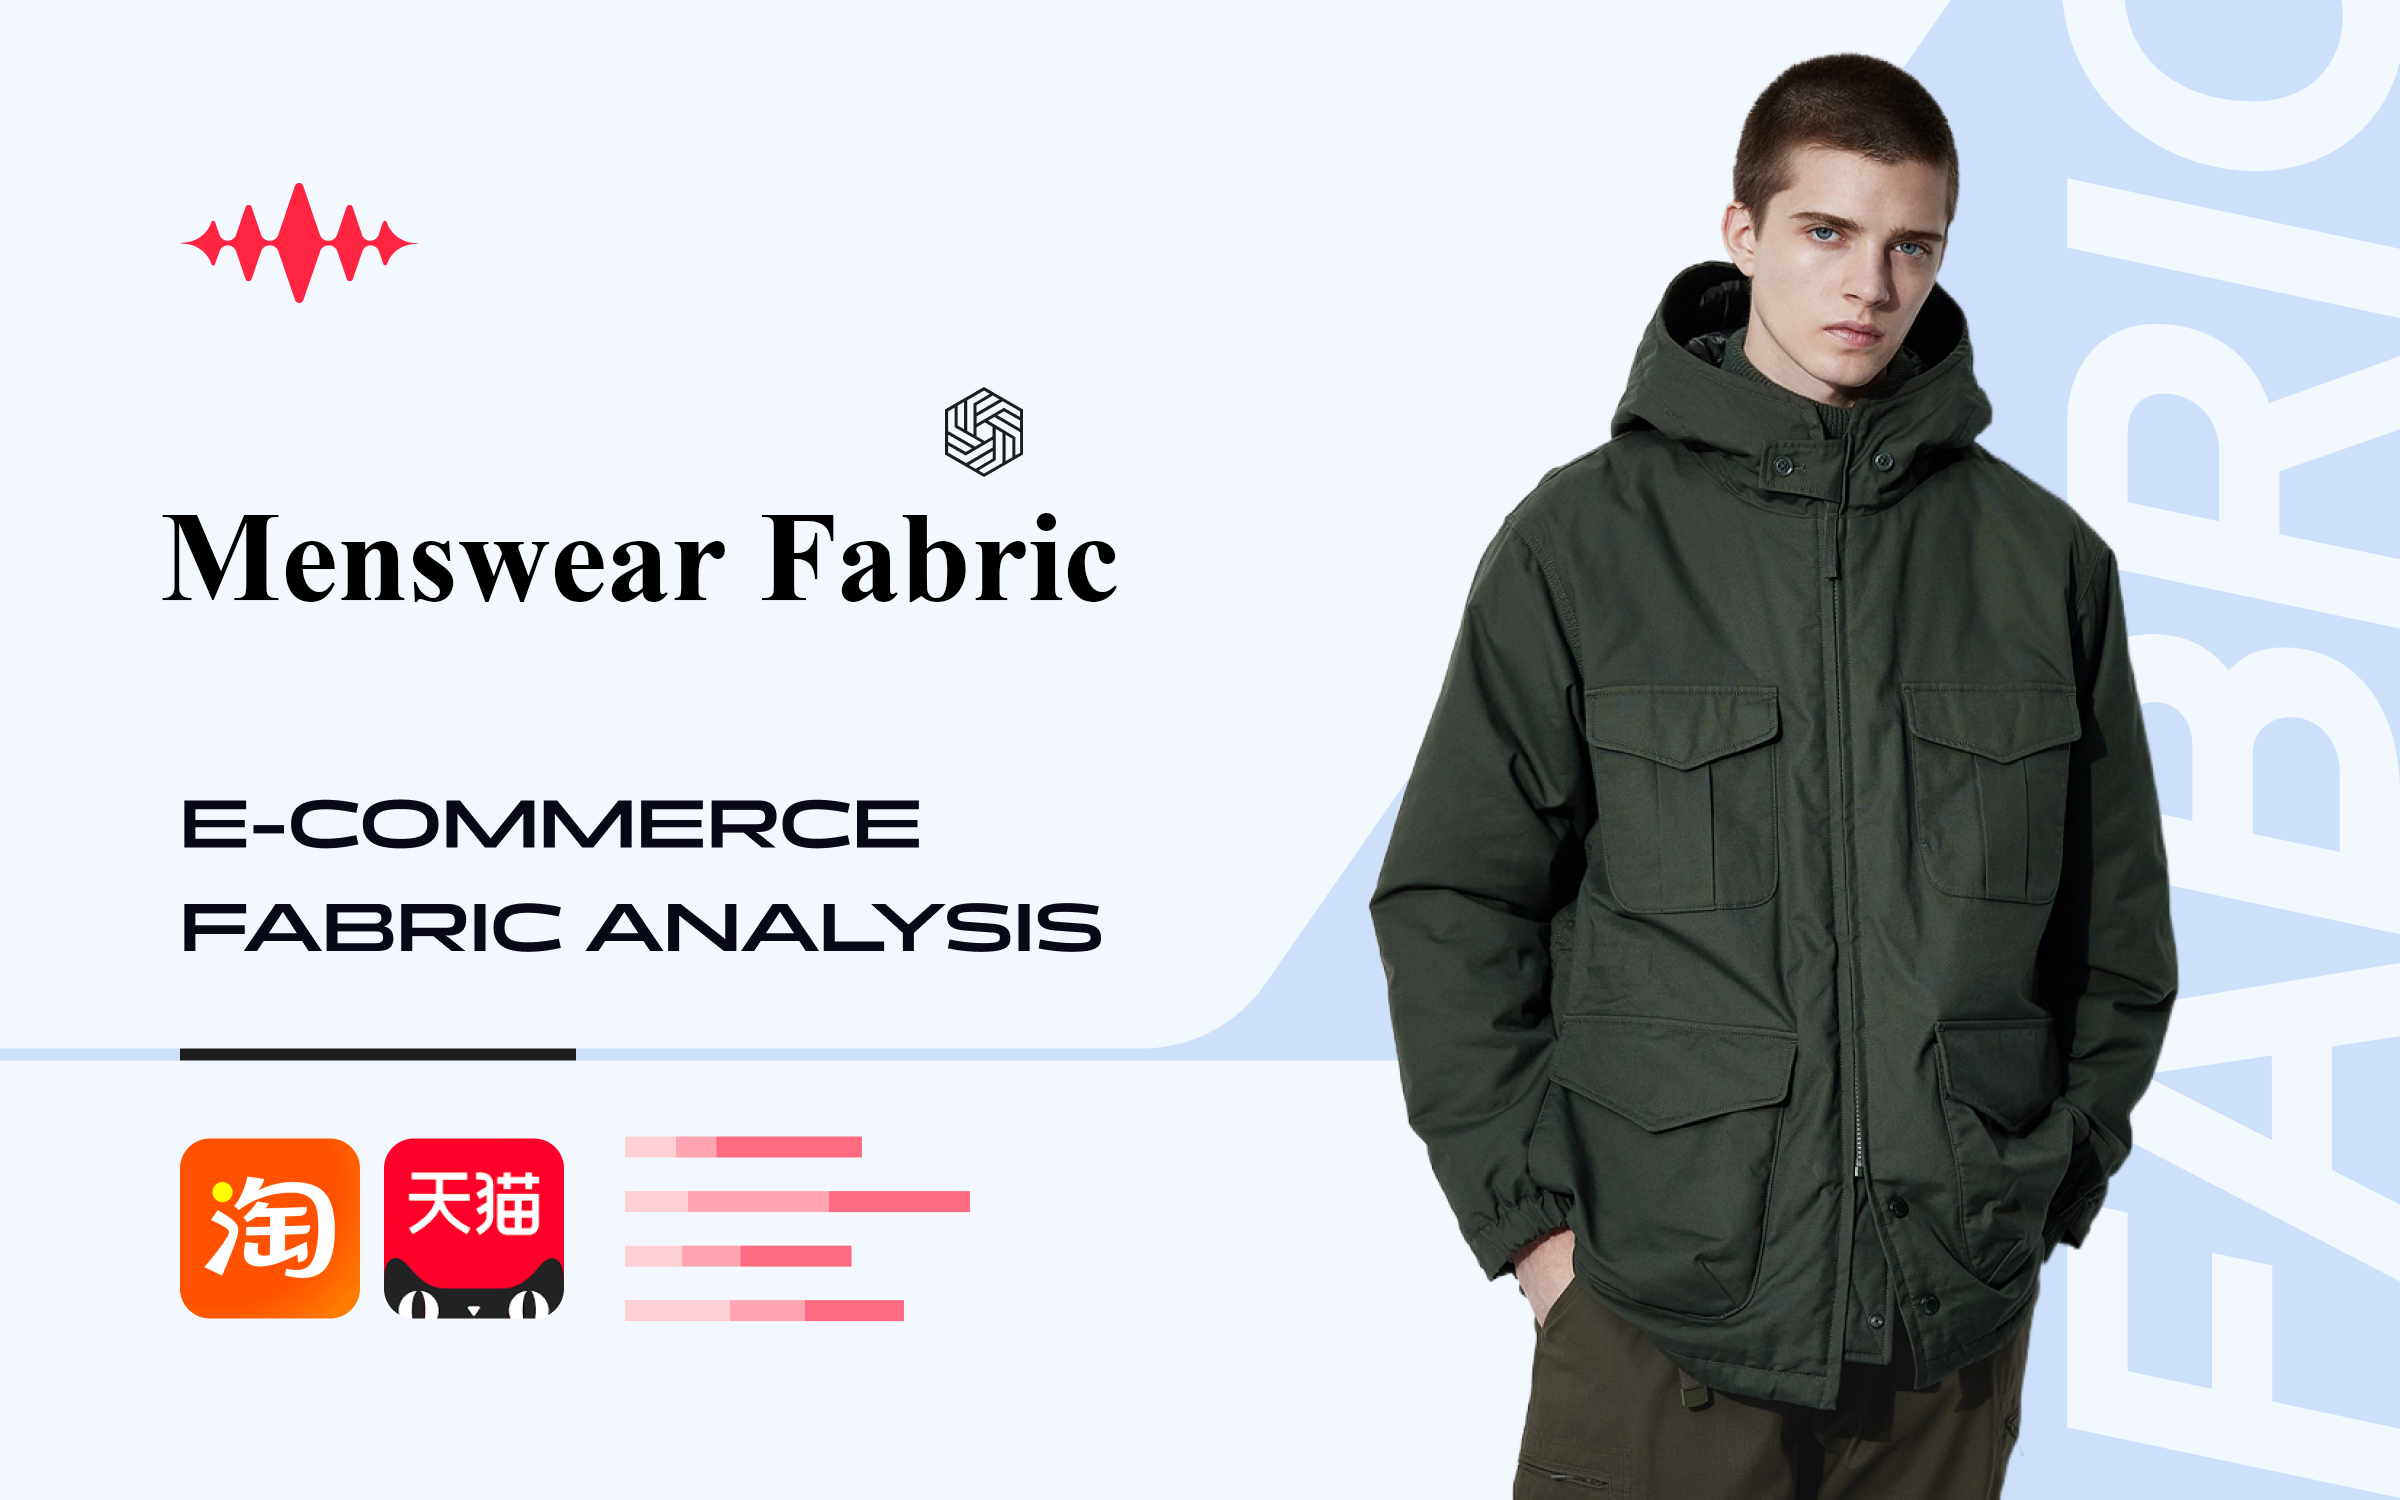 The Analysis of Popular Fabrics in Menswear E-Commerce in March